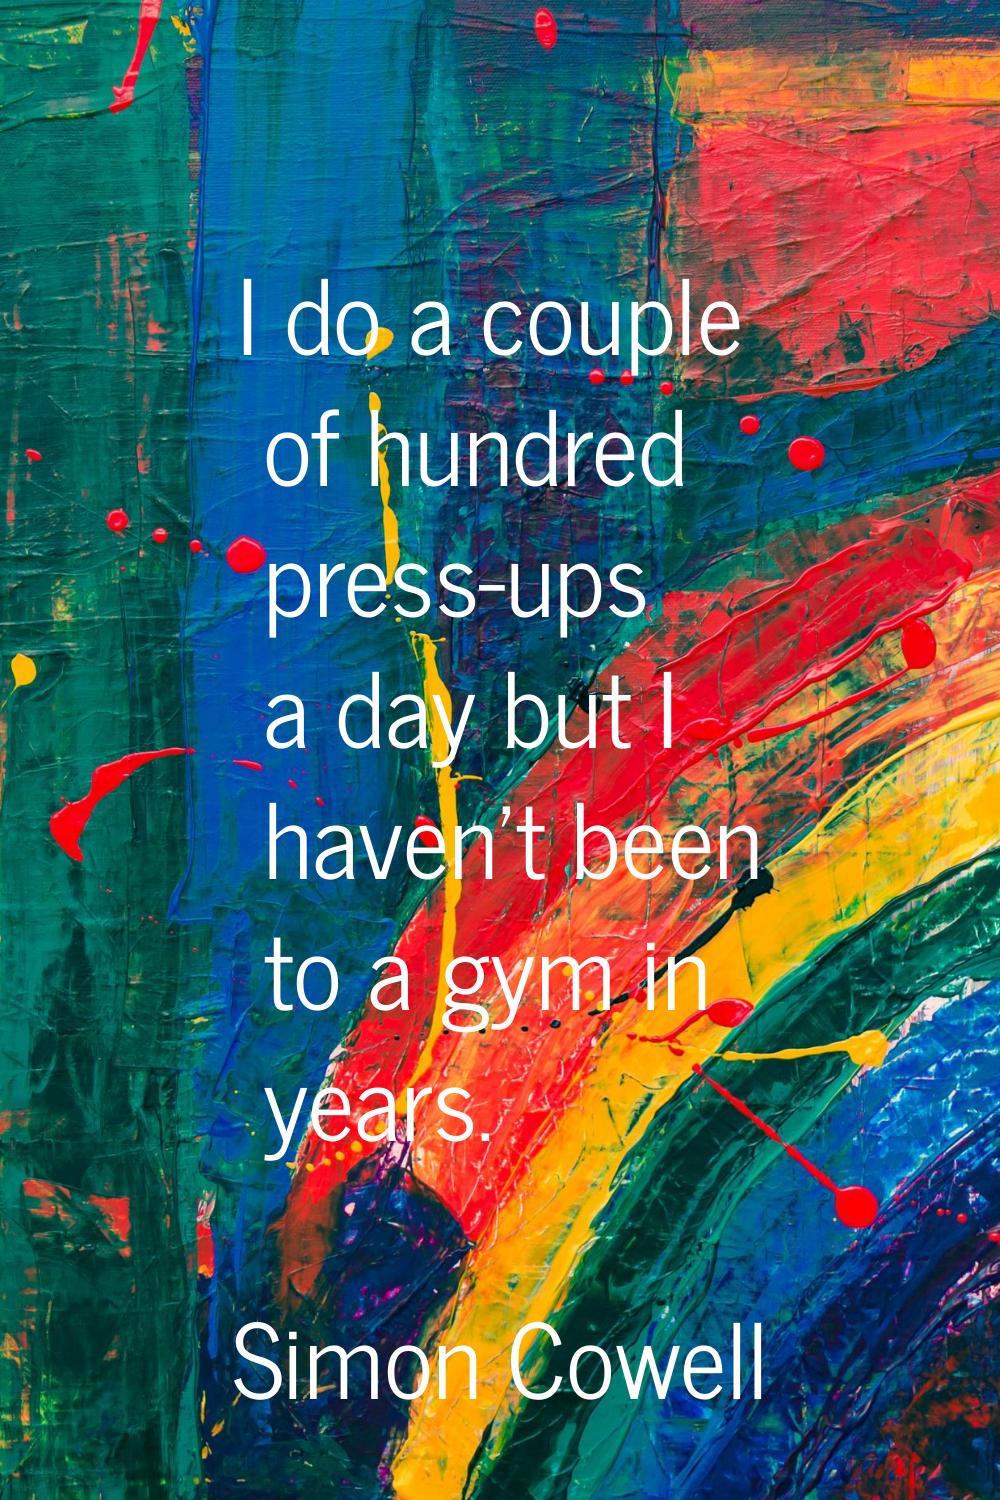 I do a couple of hundred press-ups a day but I haven't been to a gym in years.